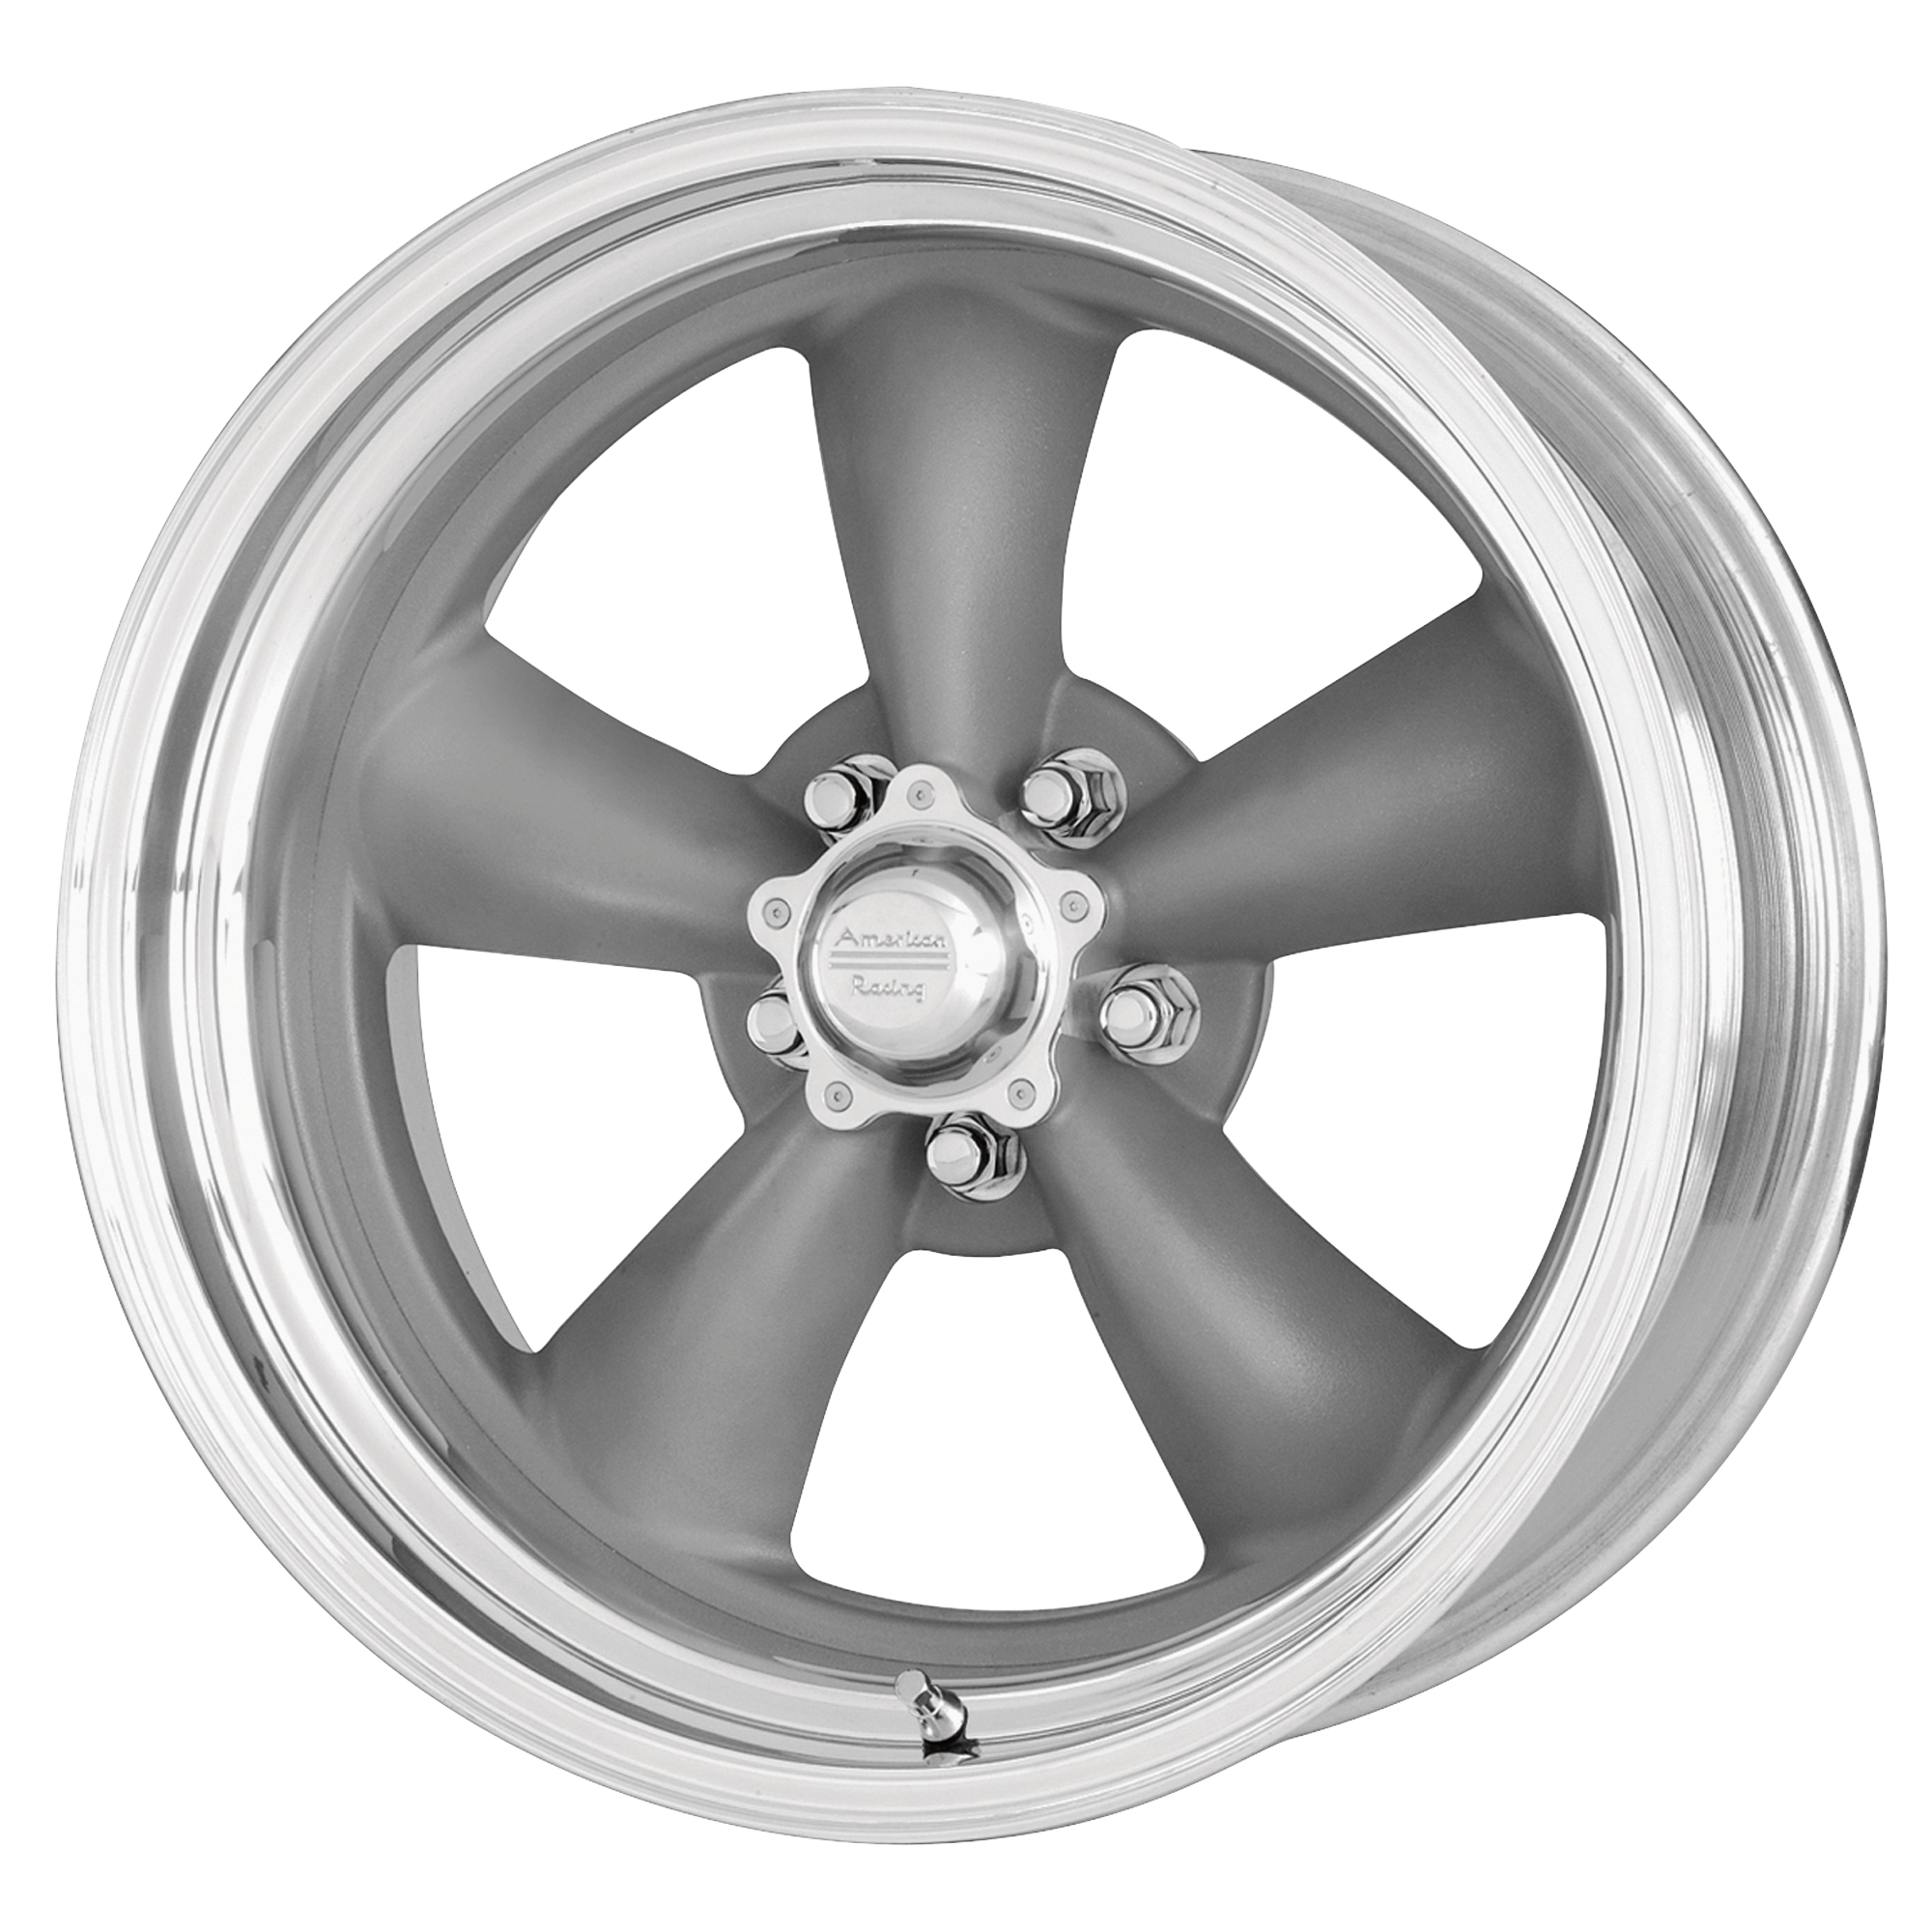 CLASSIC TORQ THRUST II ONE PIECE 18x7 5x127.00 MAG GRAY W/ MACHINED LIP (6 mm) - Tires and Engine Performance